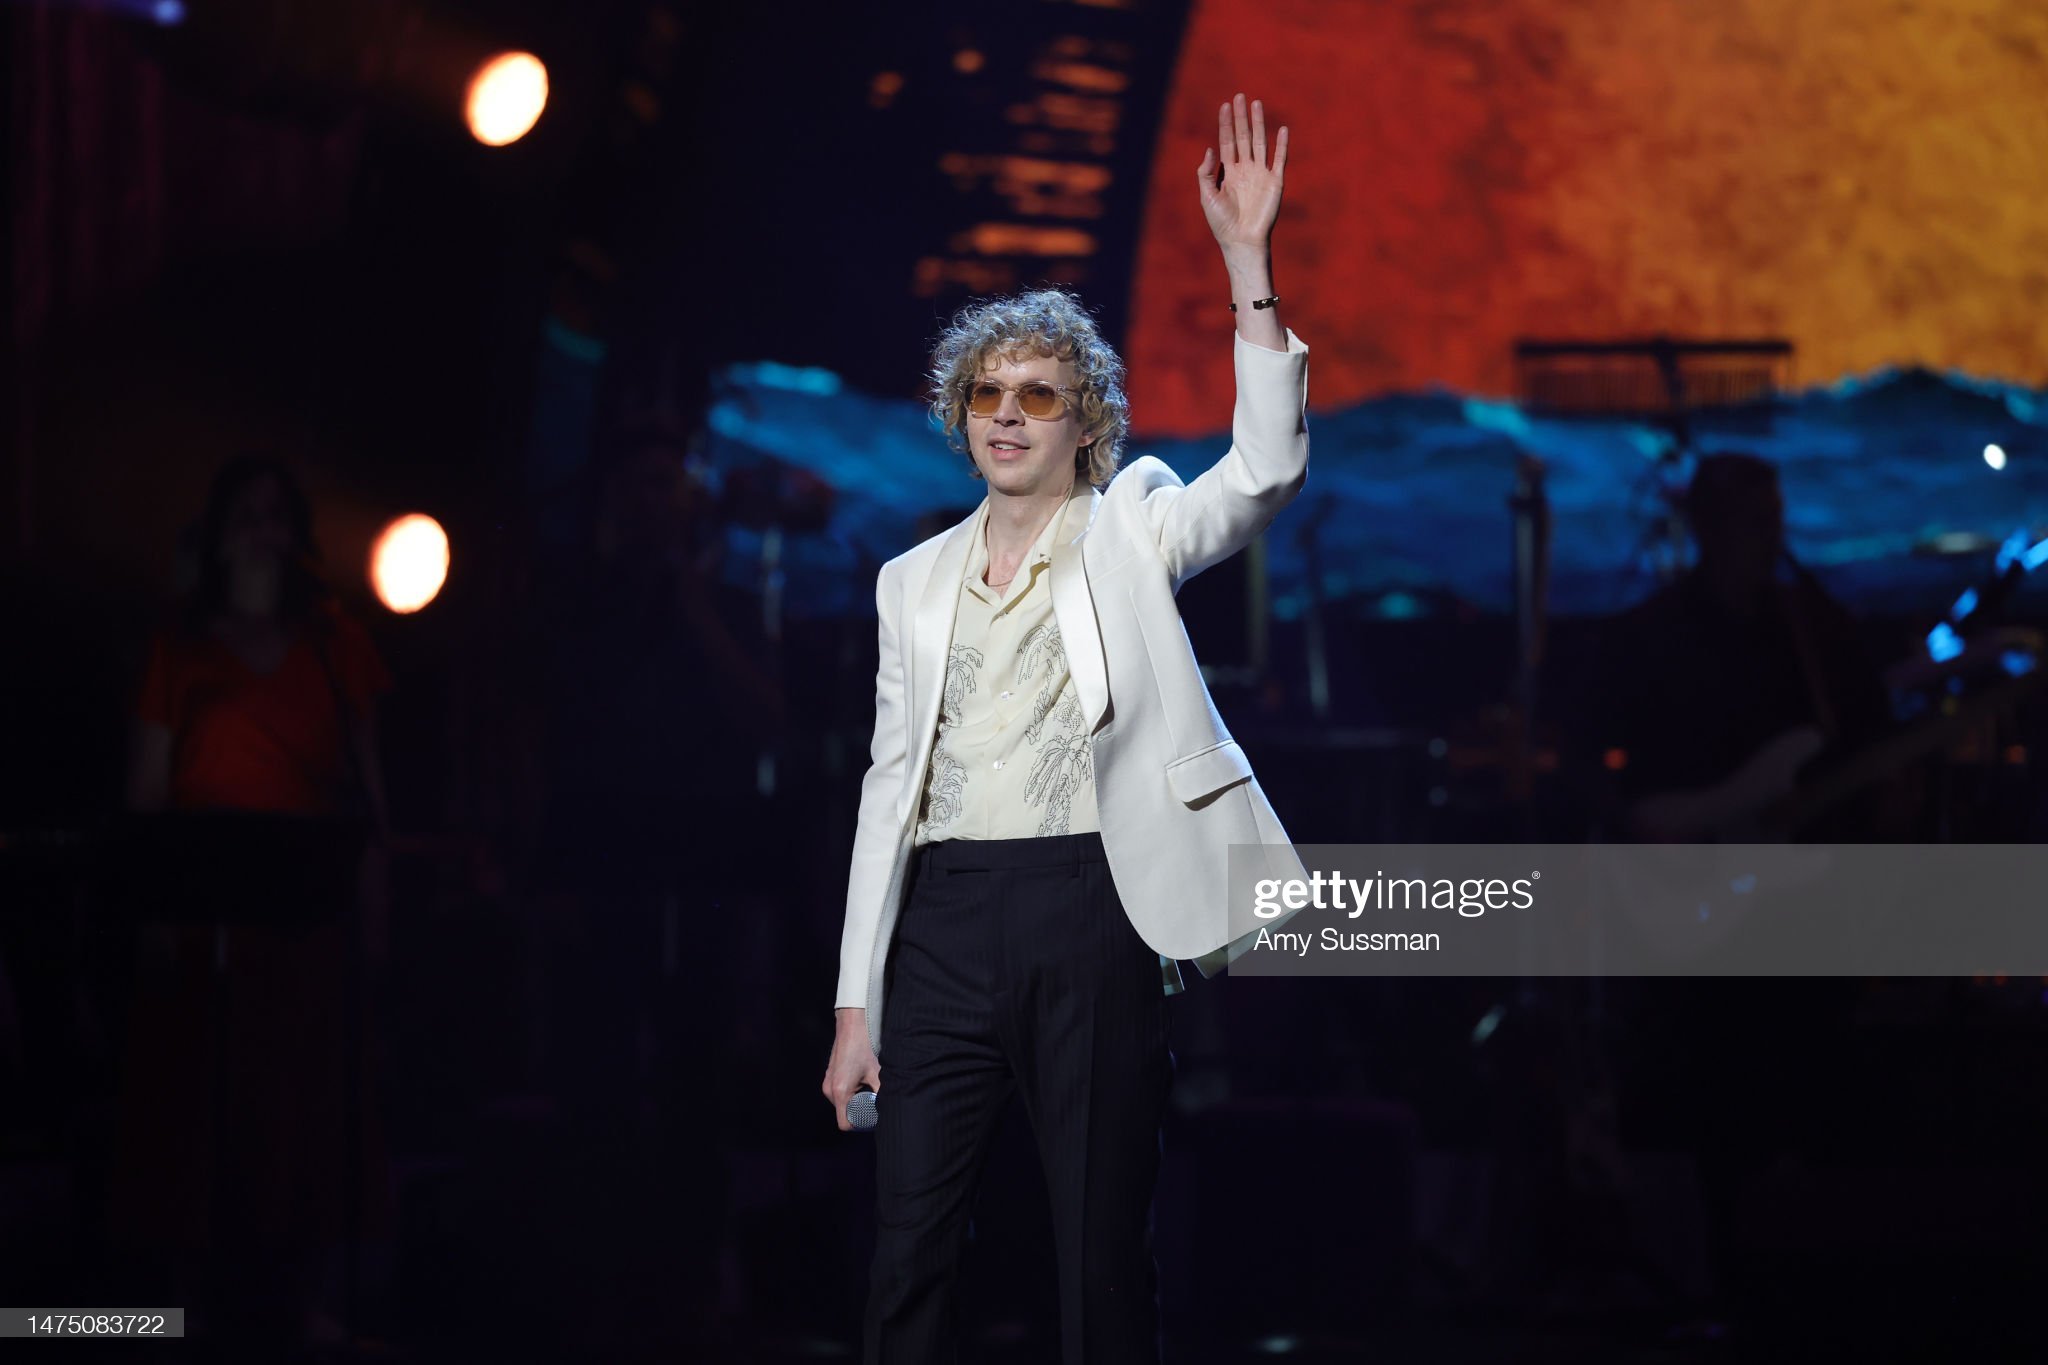 gettyimages-1475083722-2048x2048.jpg